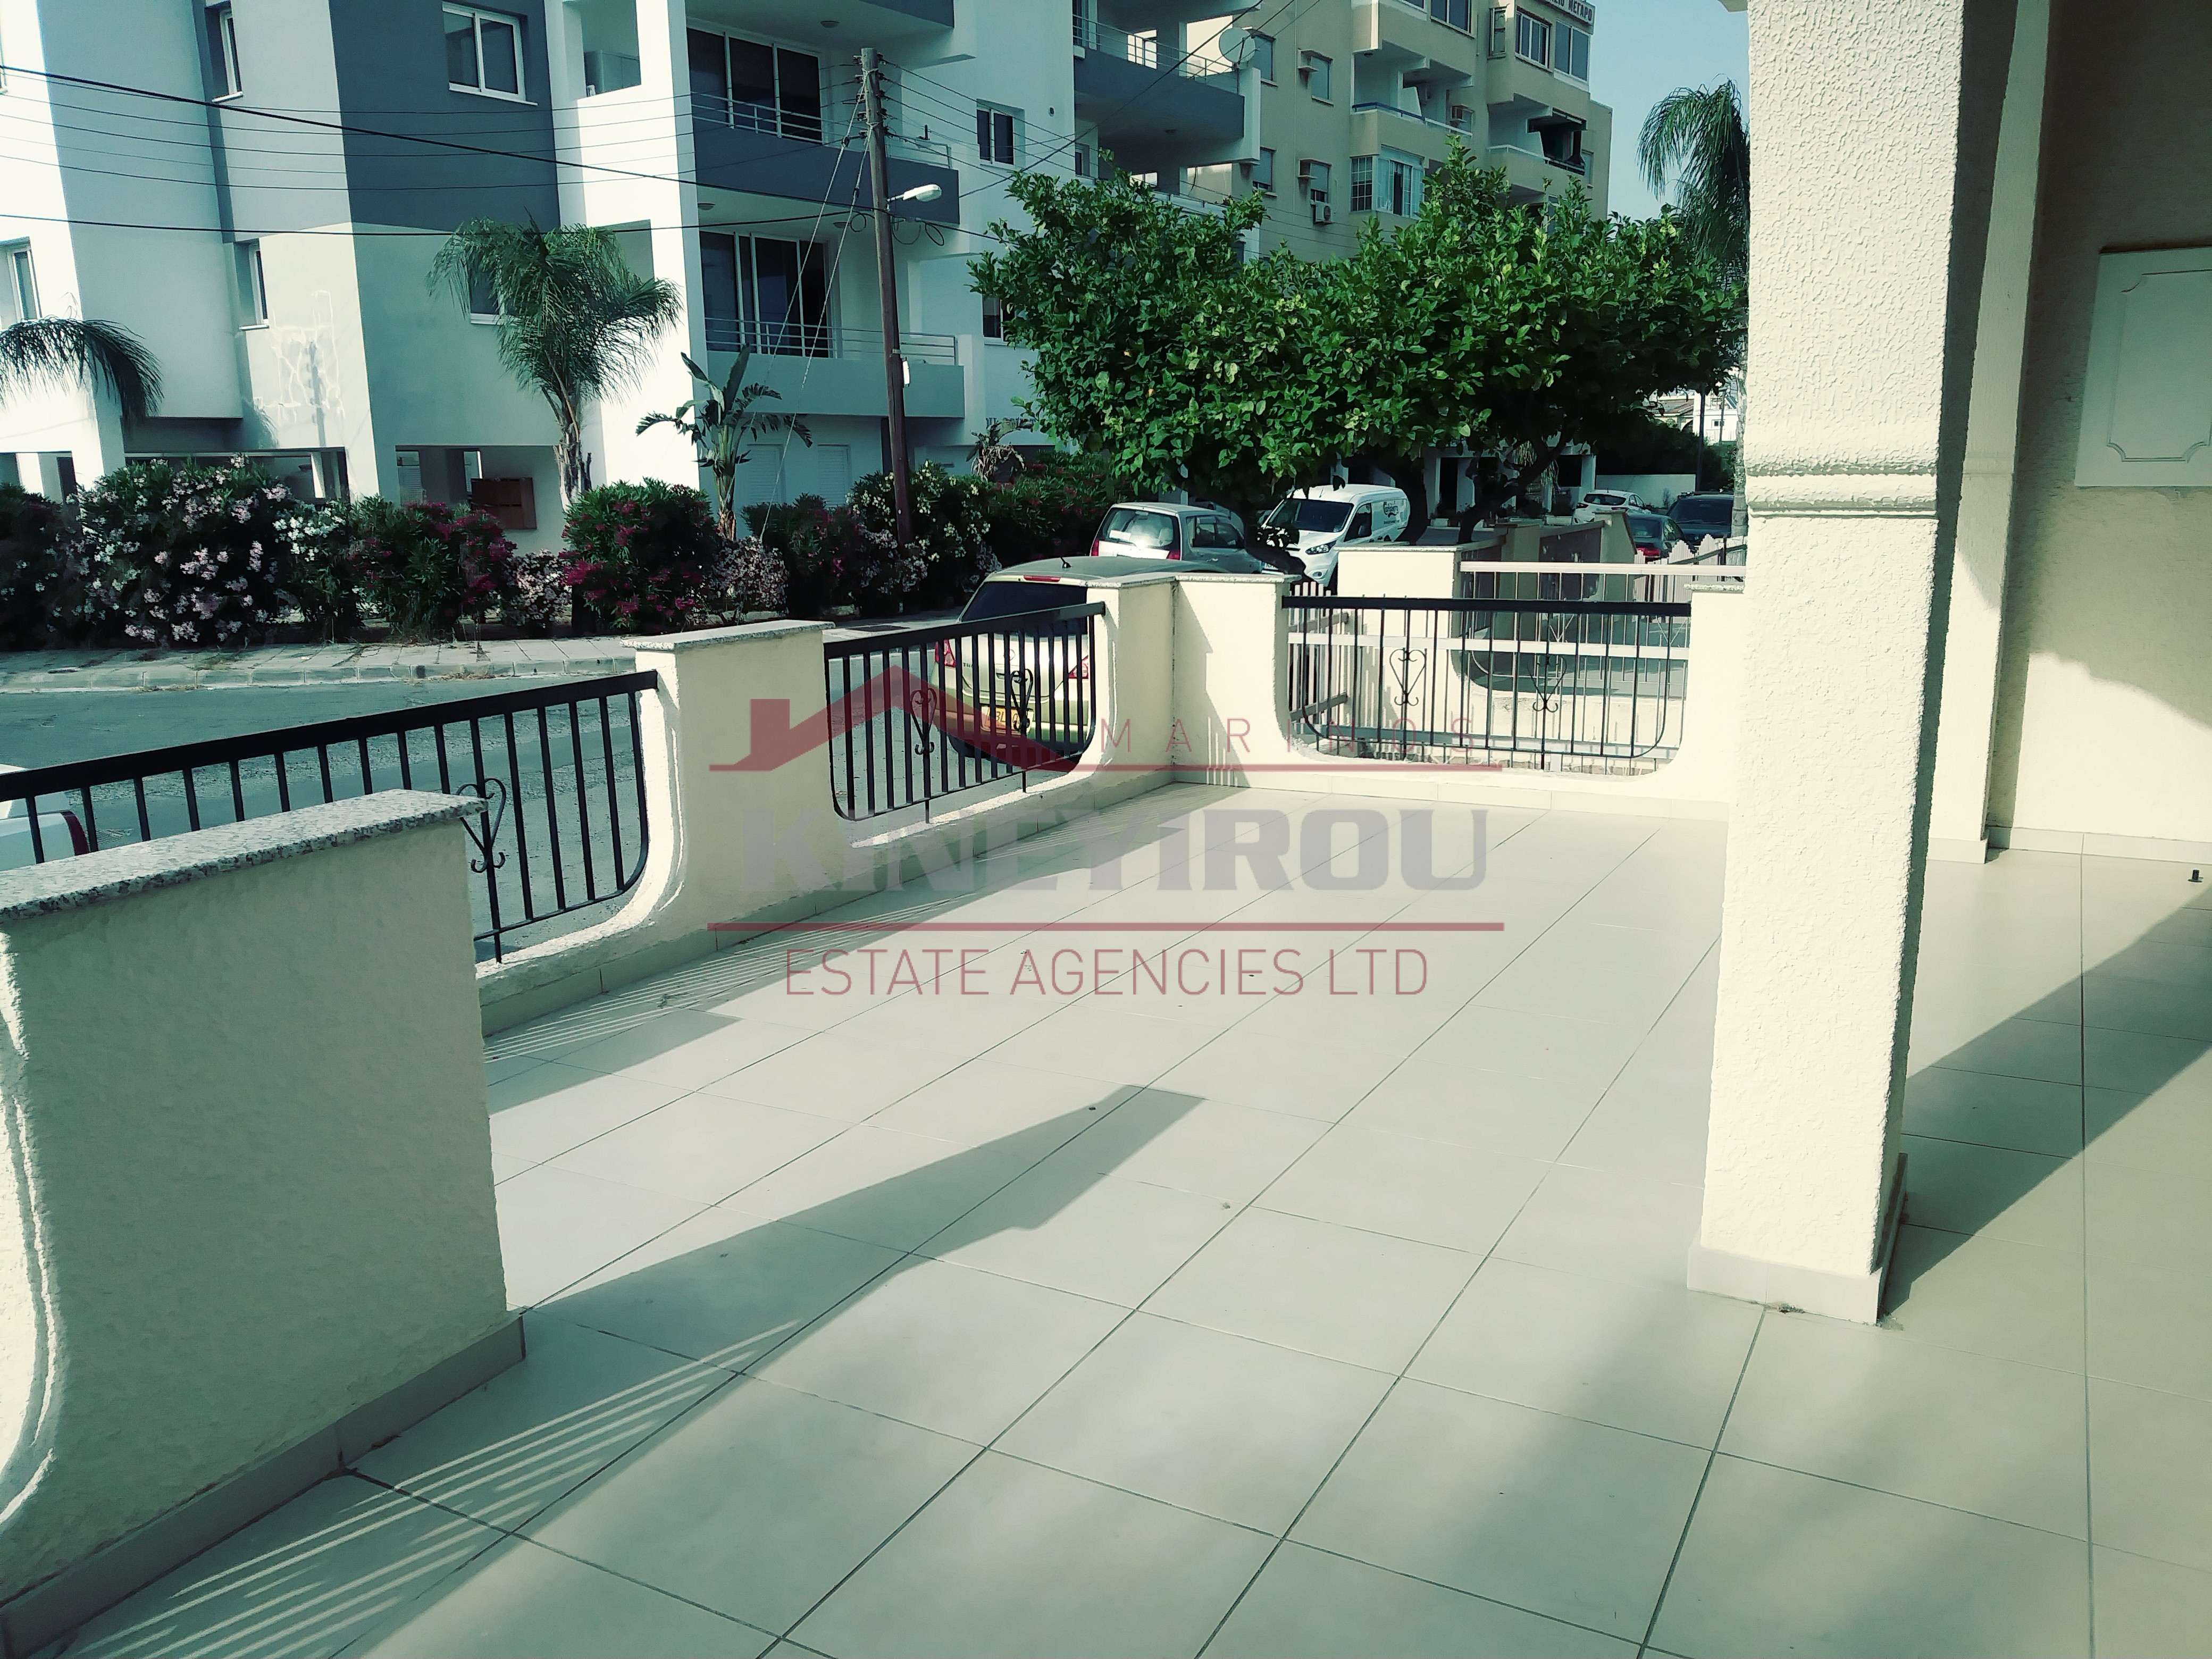 House For Rent in New Hospital- Larnaca